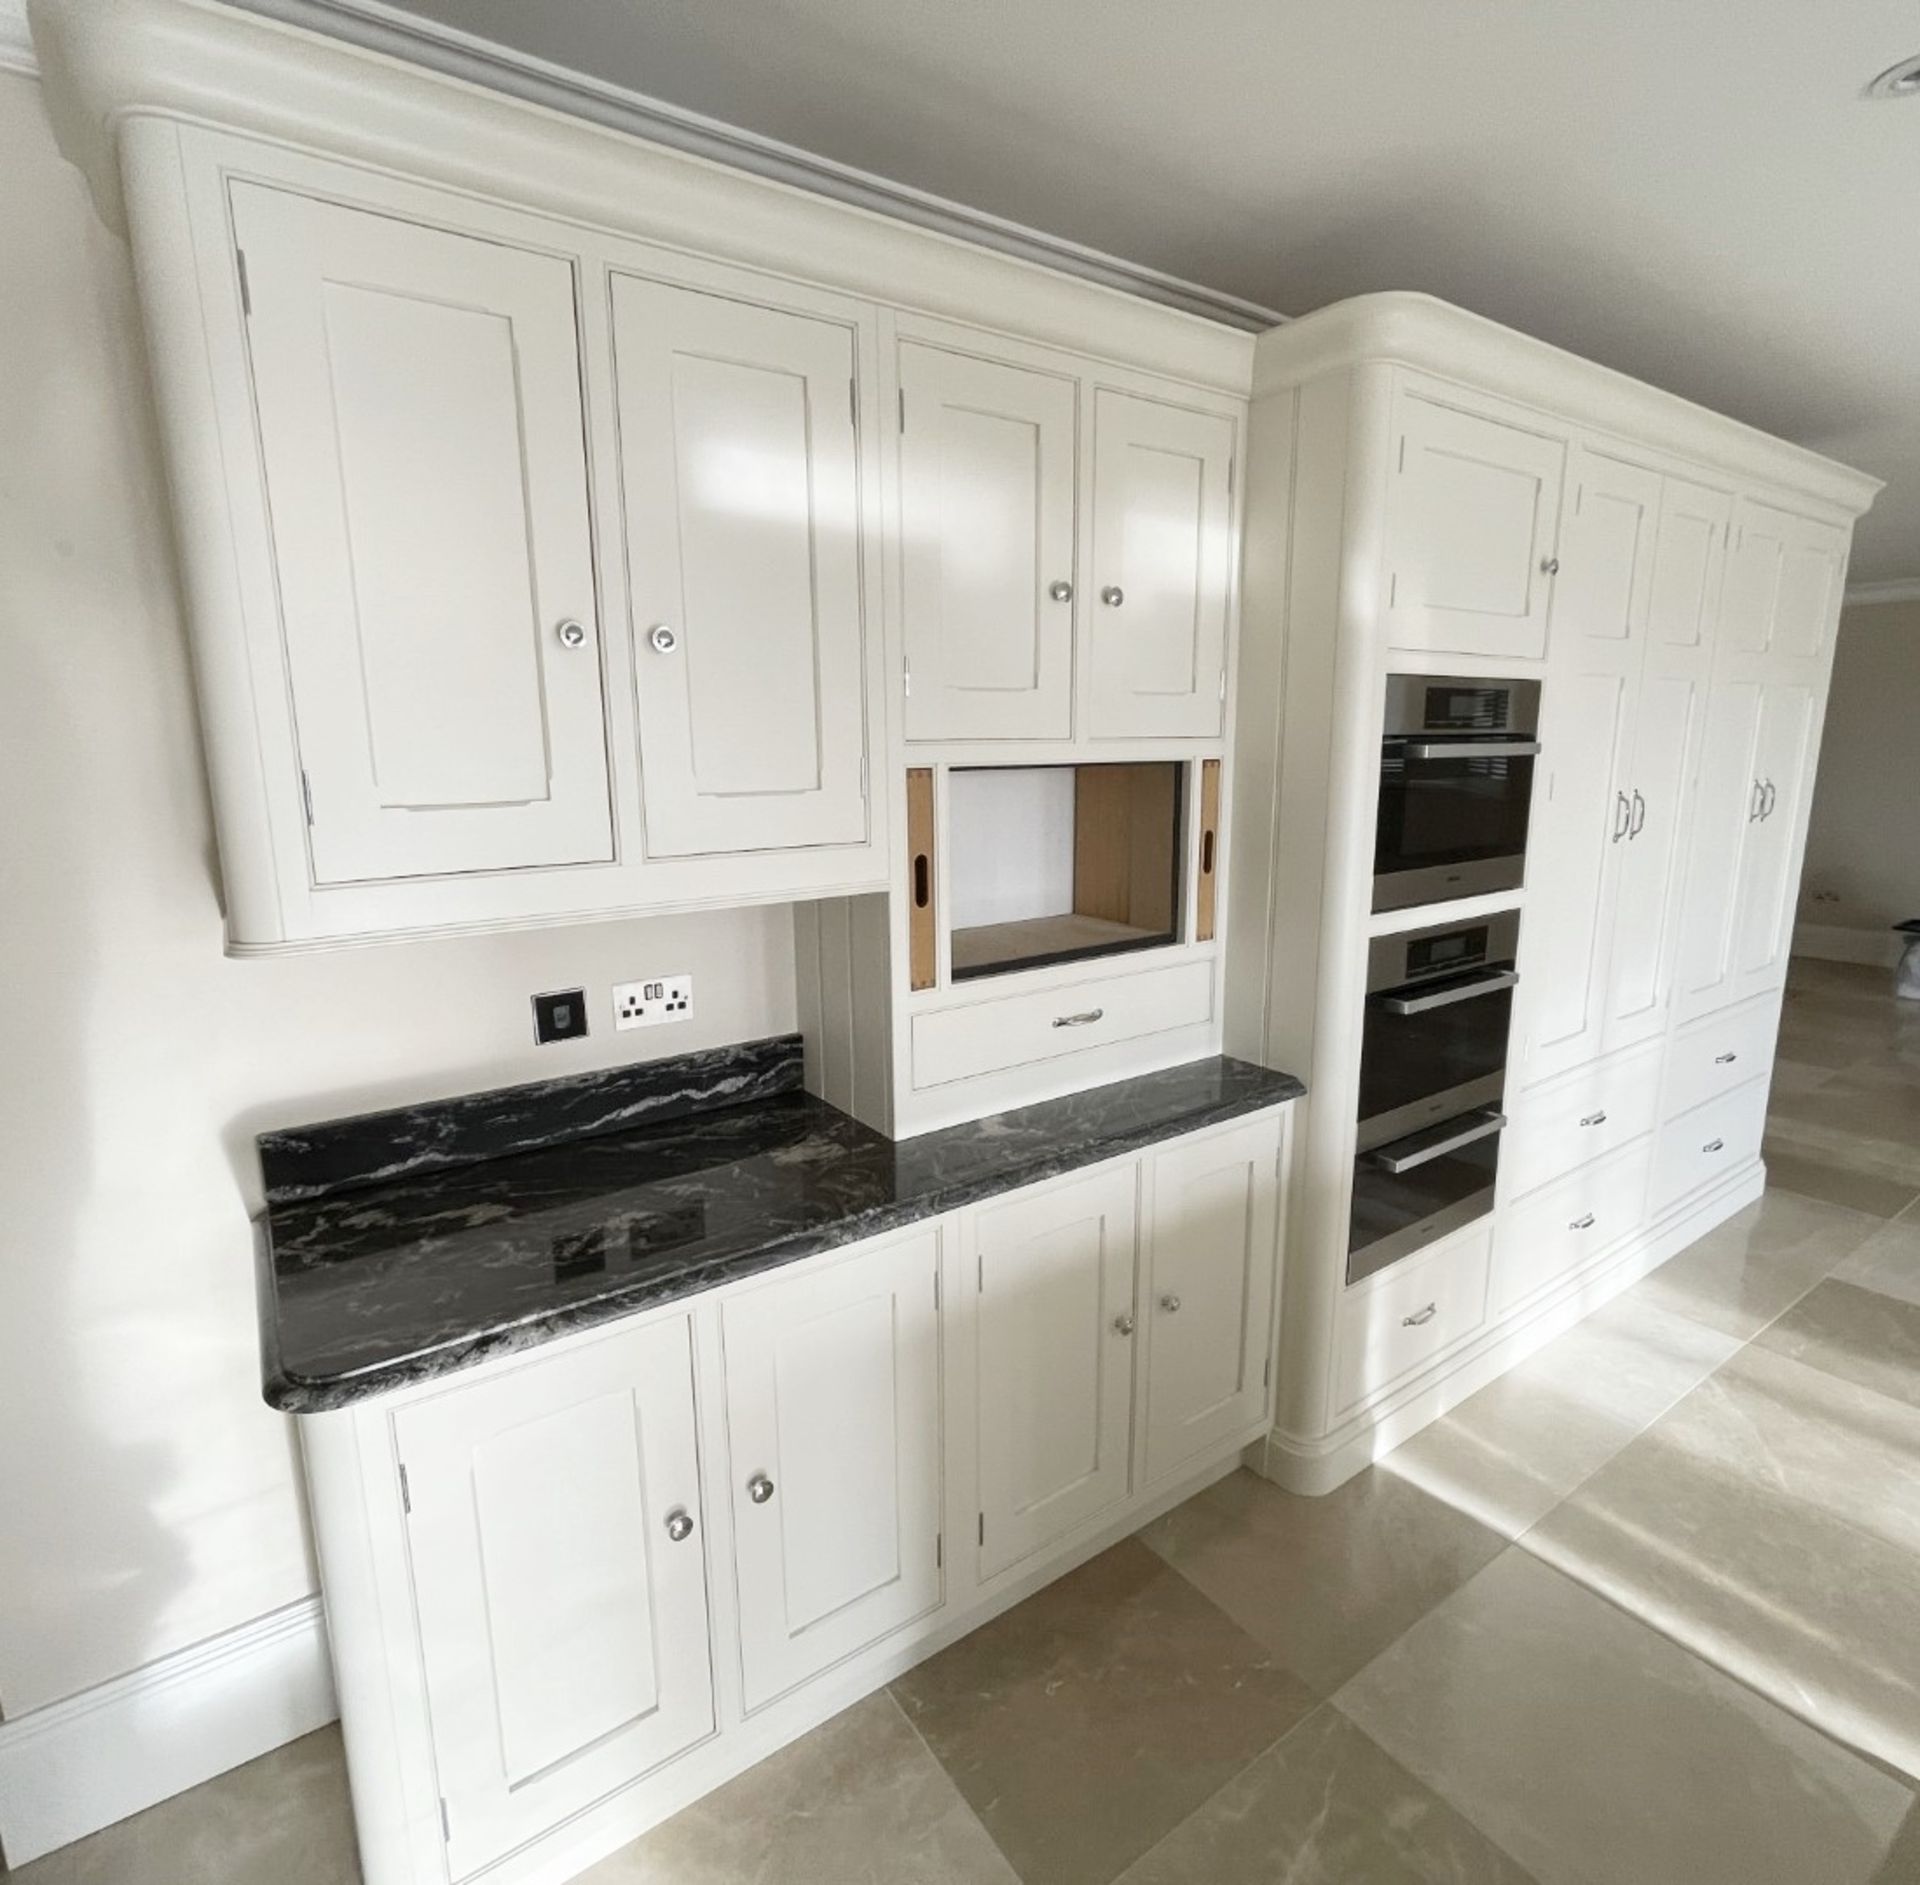 1 x Bespoke Handcrafted Shaker-style Fitted Kitchen Marble Surfaces, Island & Miele Appliances - Image 206 of 221